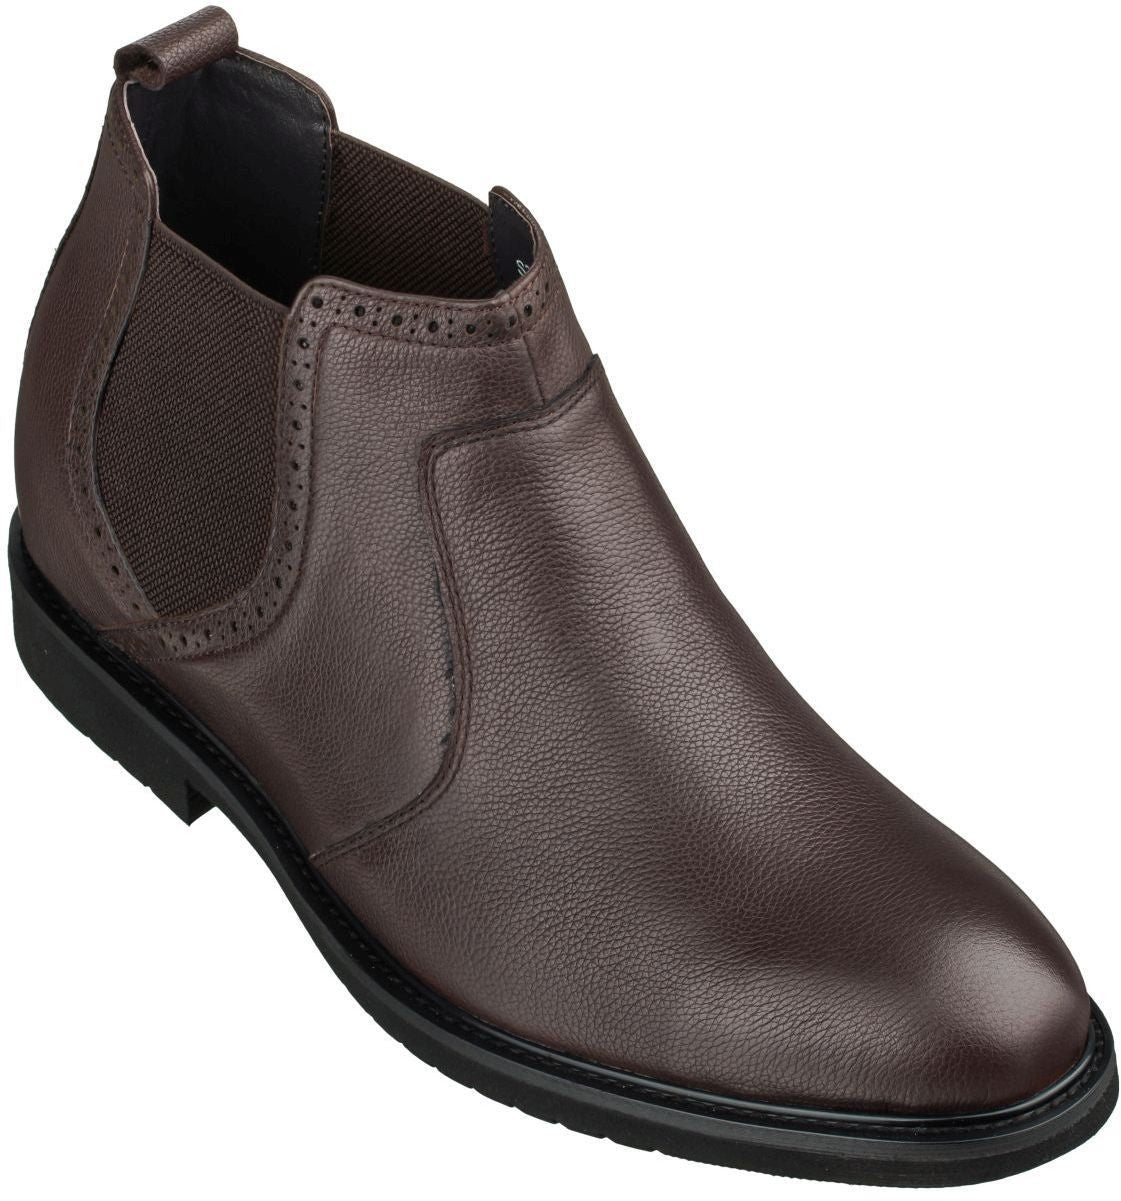 Elevator shoes height increase CALTO - S3602 - 3.2 Inches Taller (Dark Brown) - Lightweight